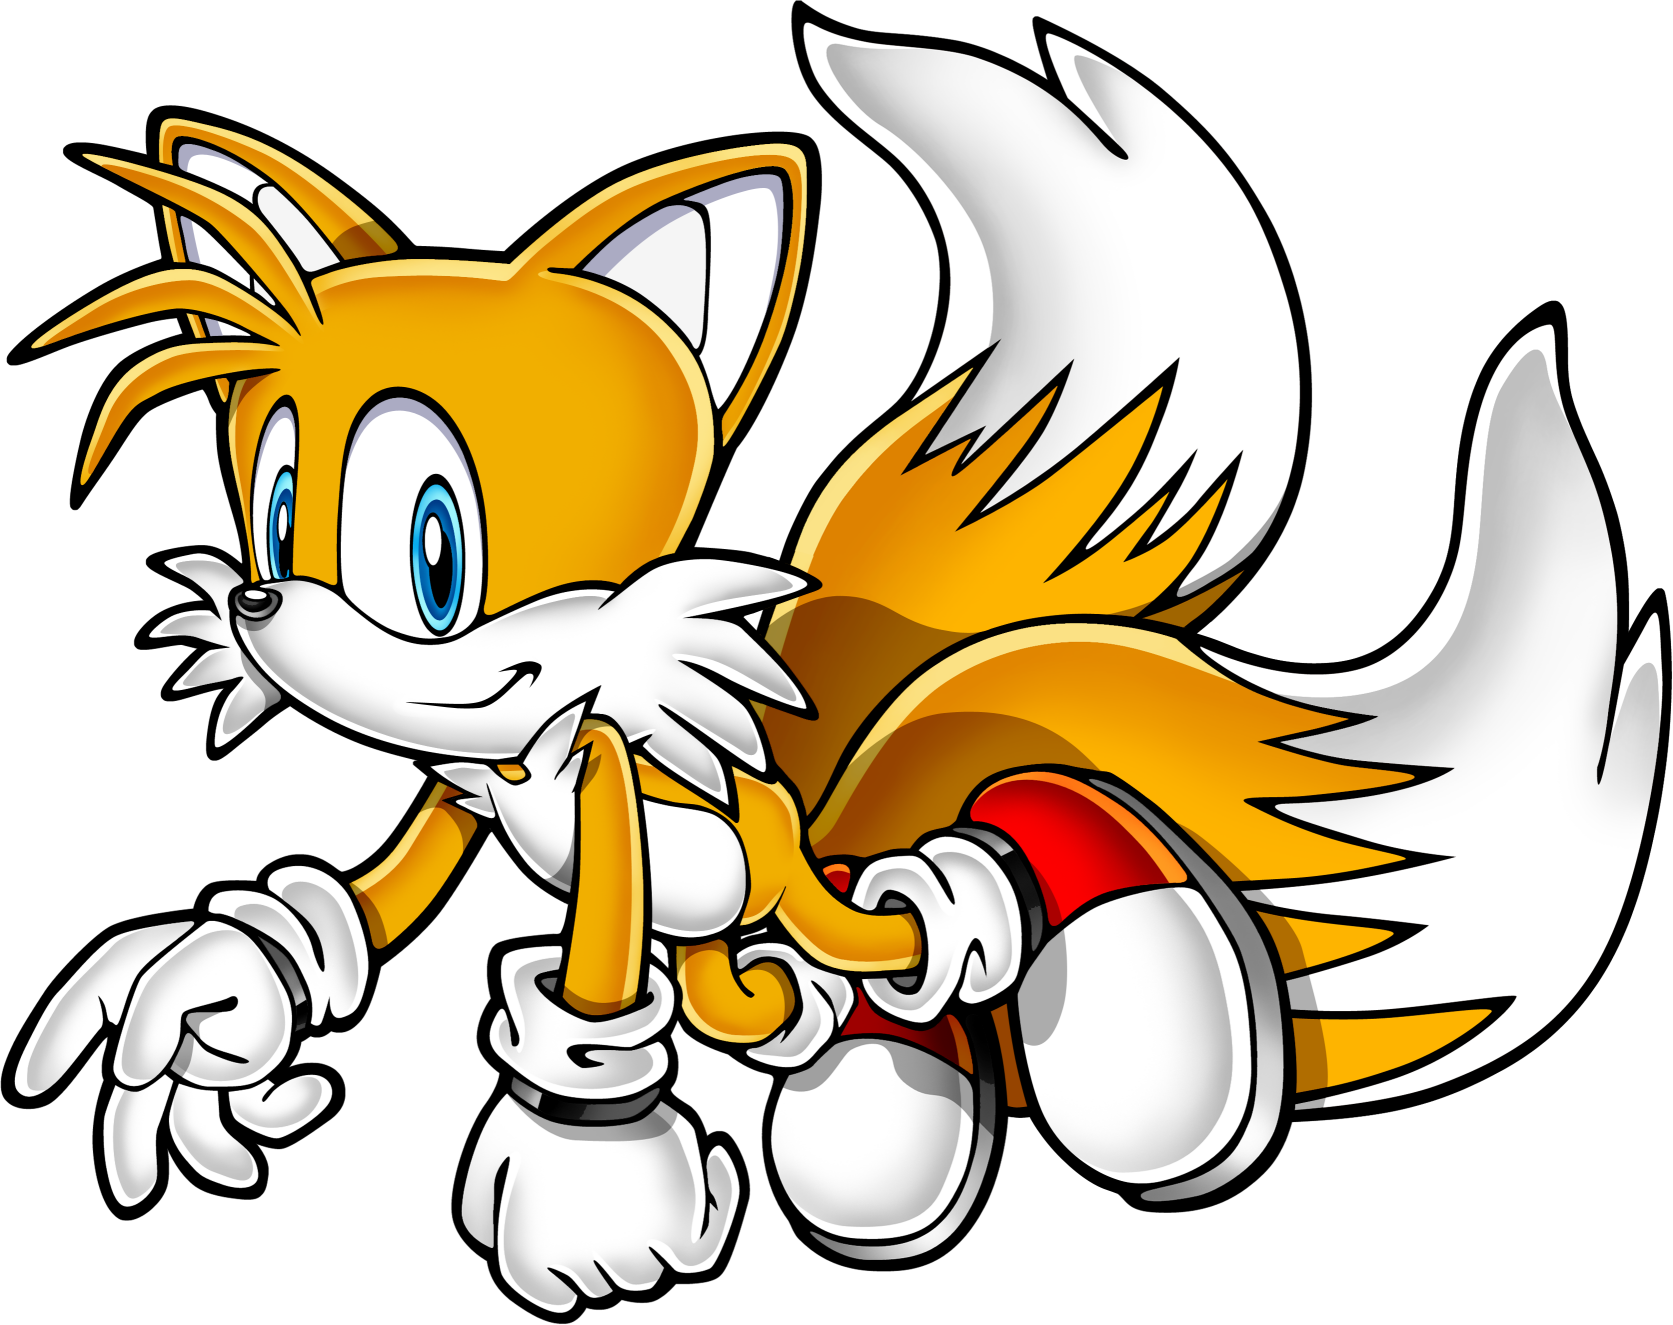 Tails - Sonic The Hedgehog